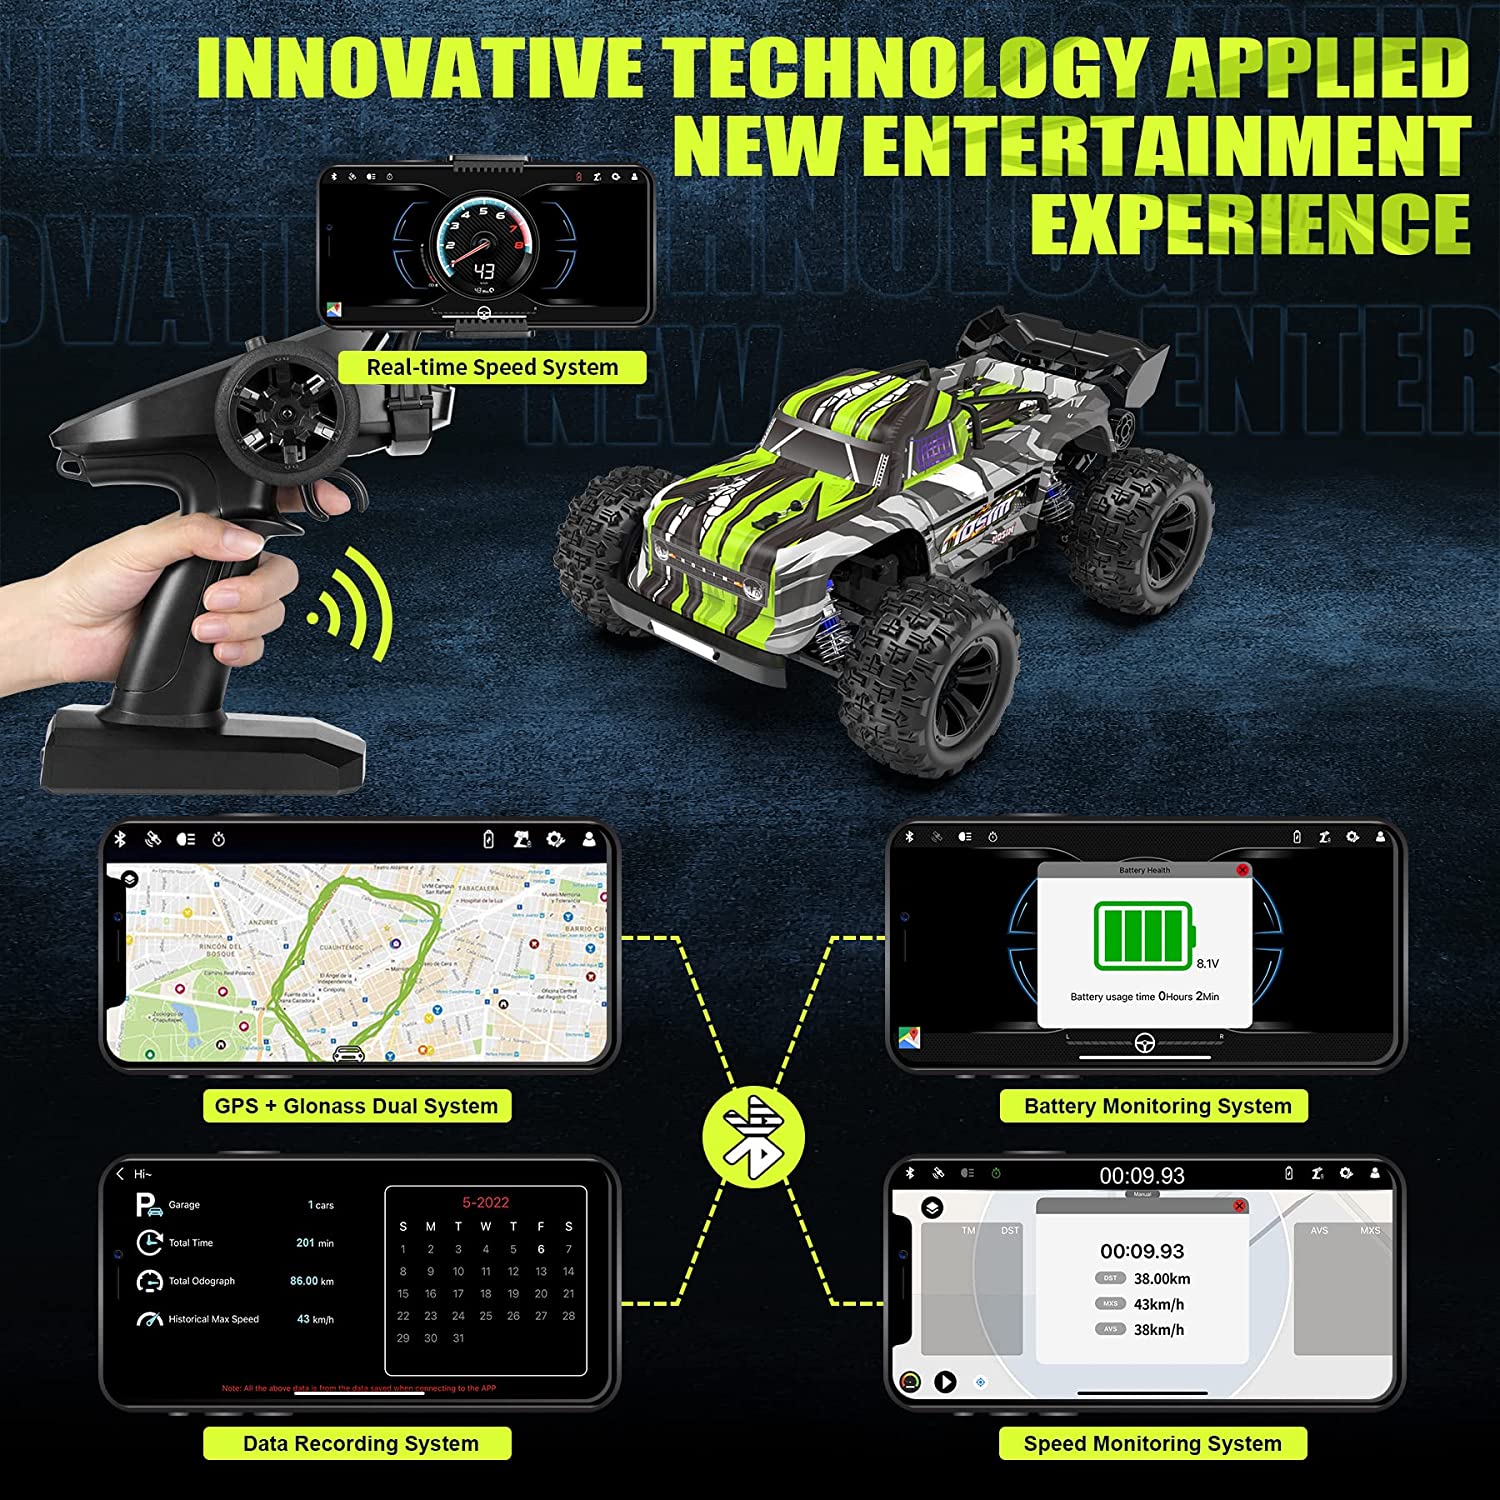 Hosim Bluetooth GPS Remote Control Car 1:16 4WD RC Car Truck with App，Radio Cars Off Road Waterproof Hobby Grade Trucks for Child Adults